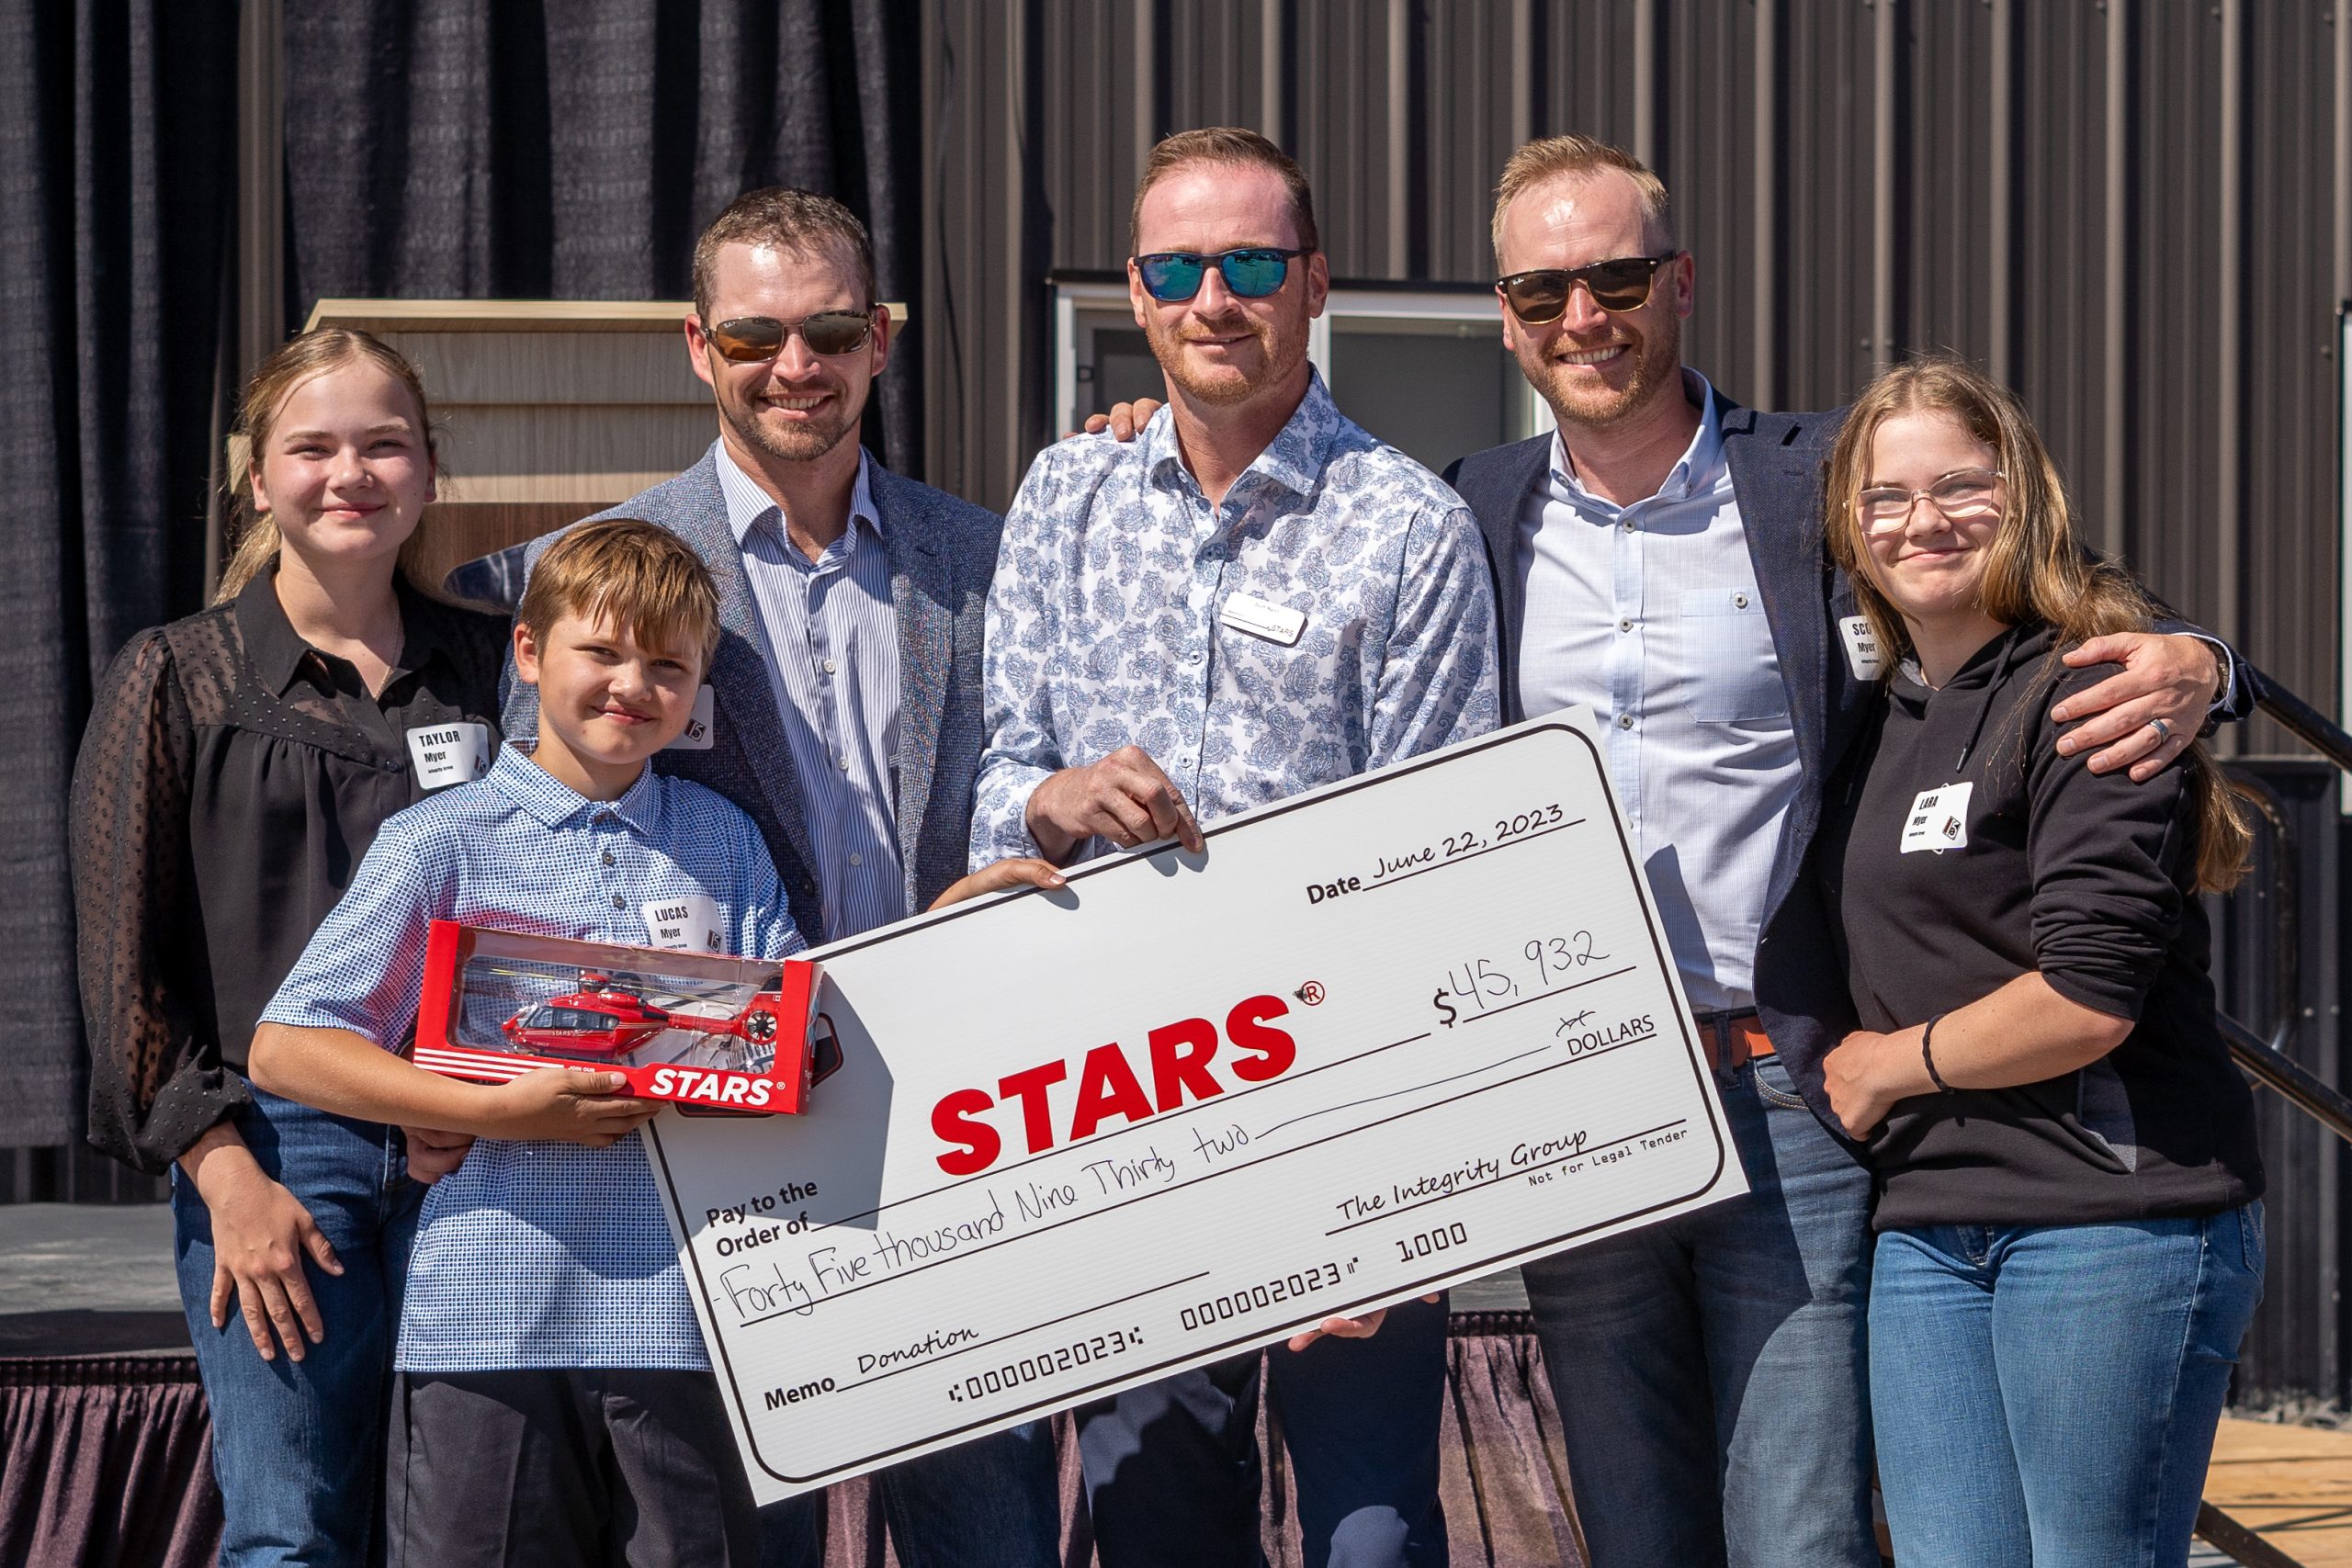 Integrity donating a large cheque to STARS Air Ambulance